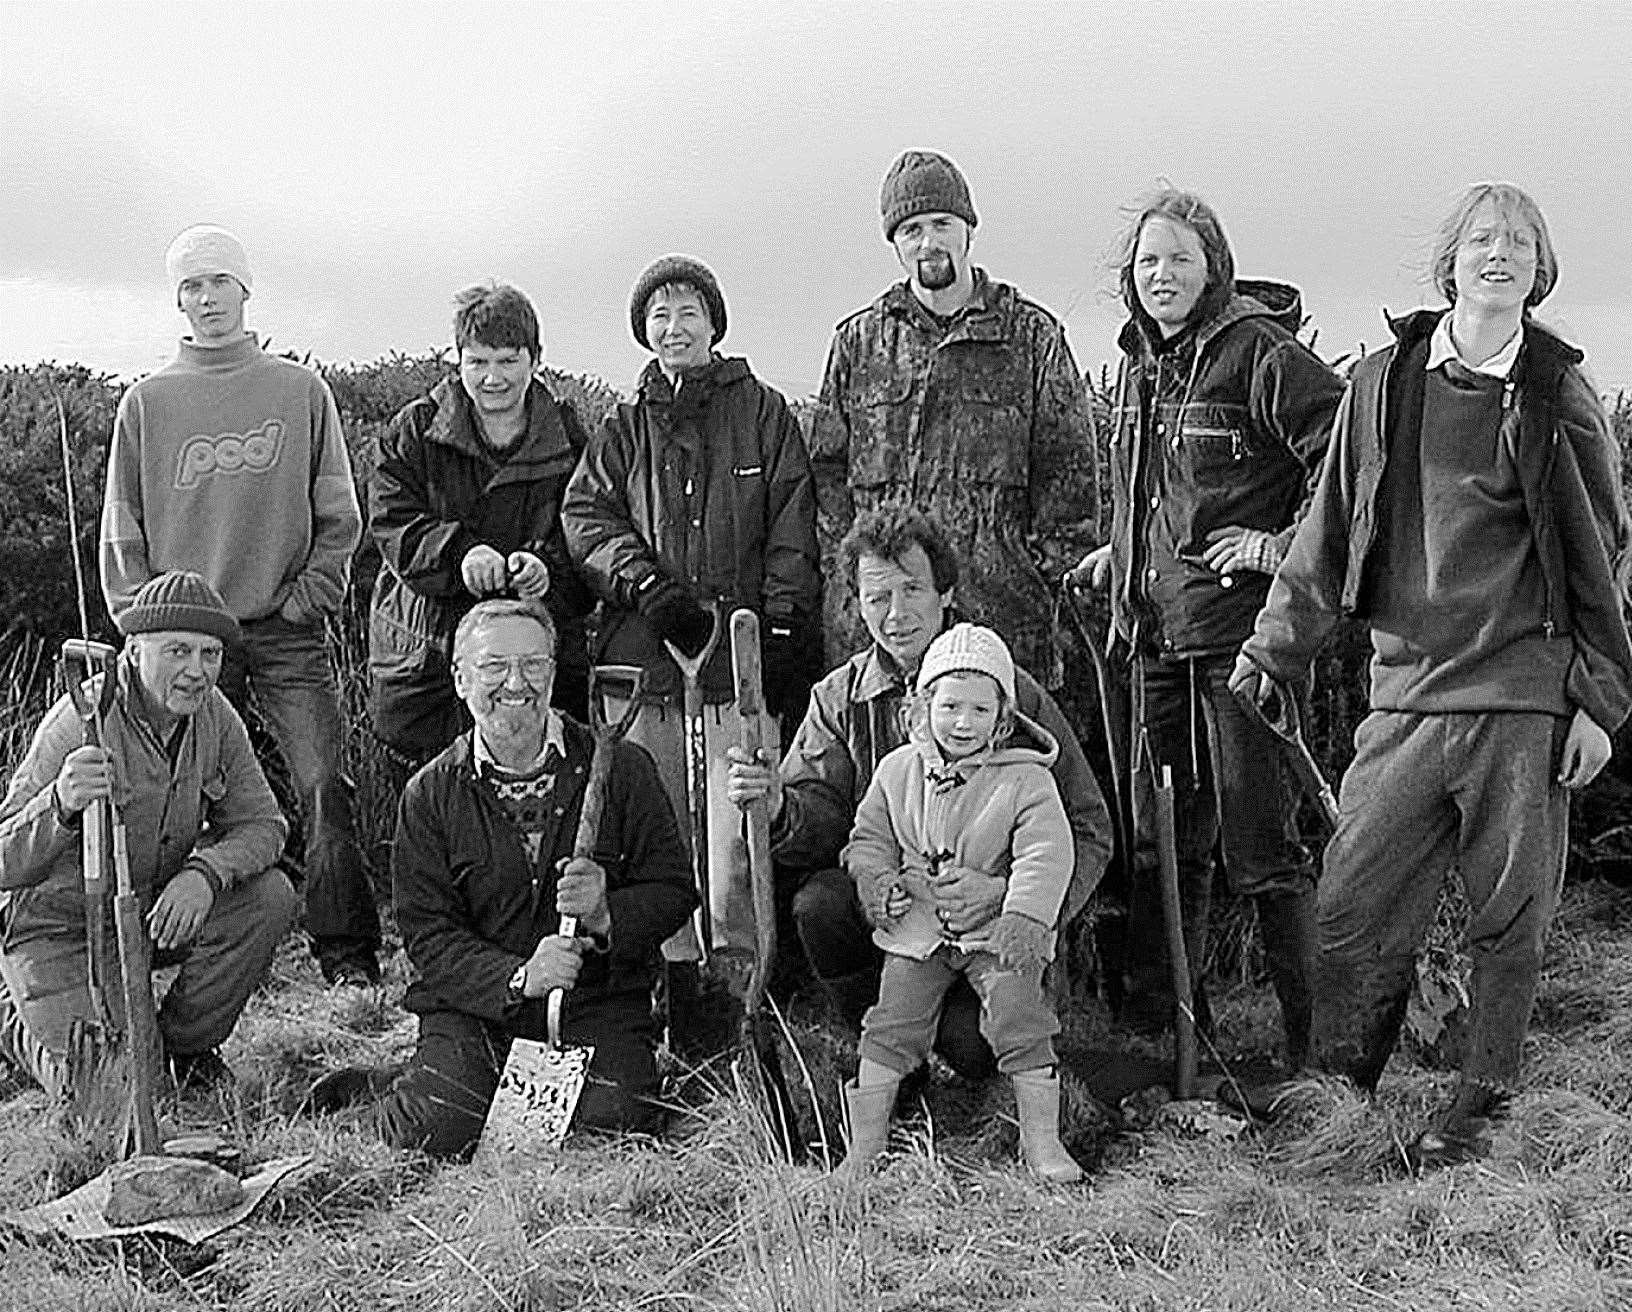 Caithness Countryside Volunteers who in 2004 planted willow and alder trees around a pond at Achreamie to establish cover and shelter for birds.